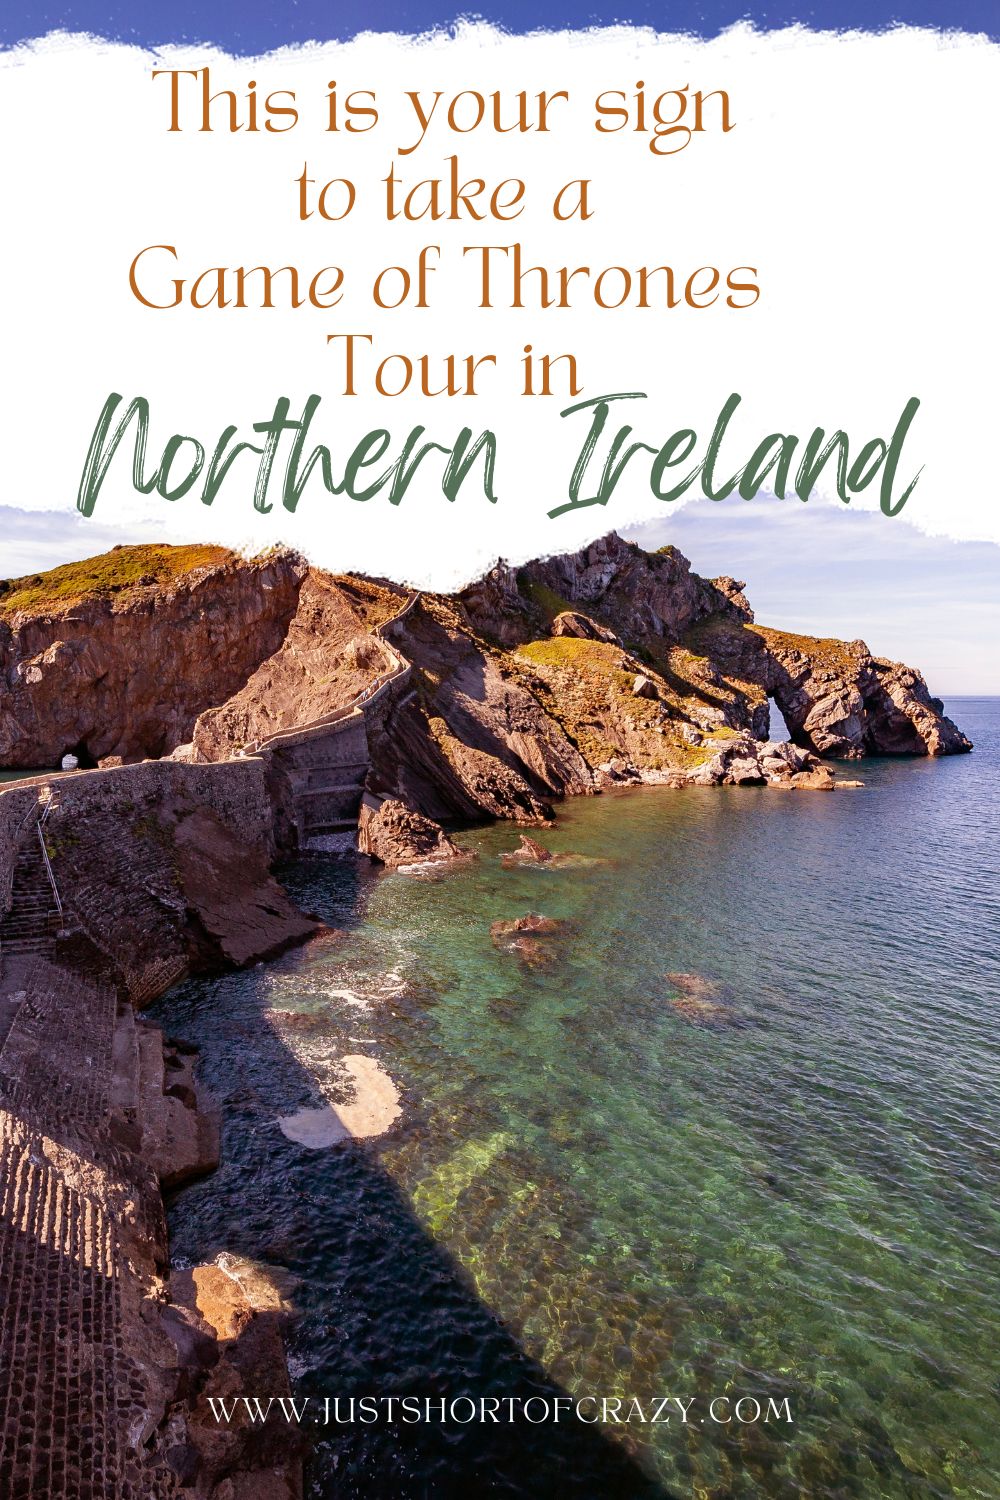 This is your sign to take a Game of Thrones Tour in Northern Ireland